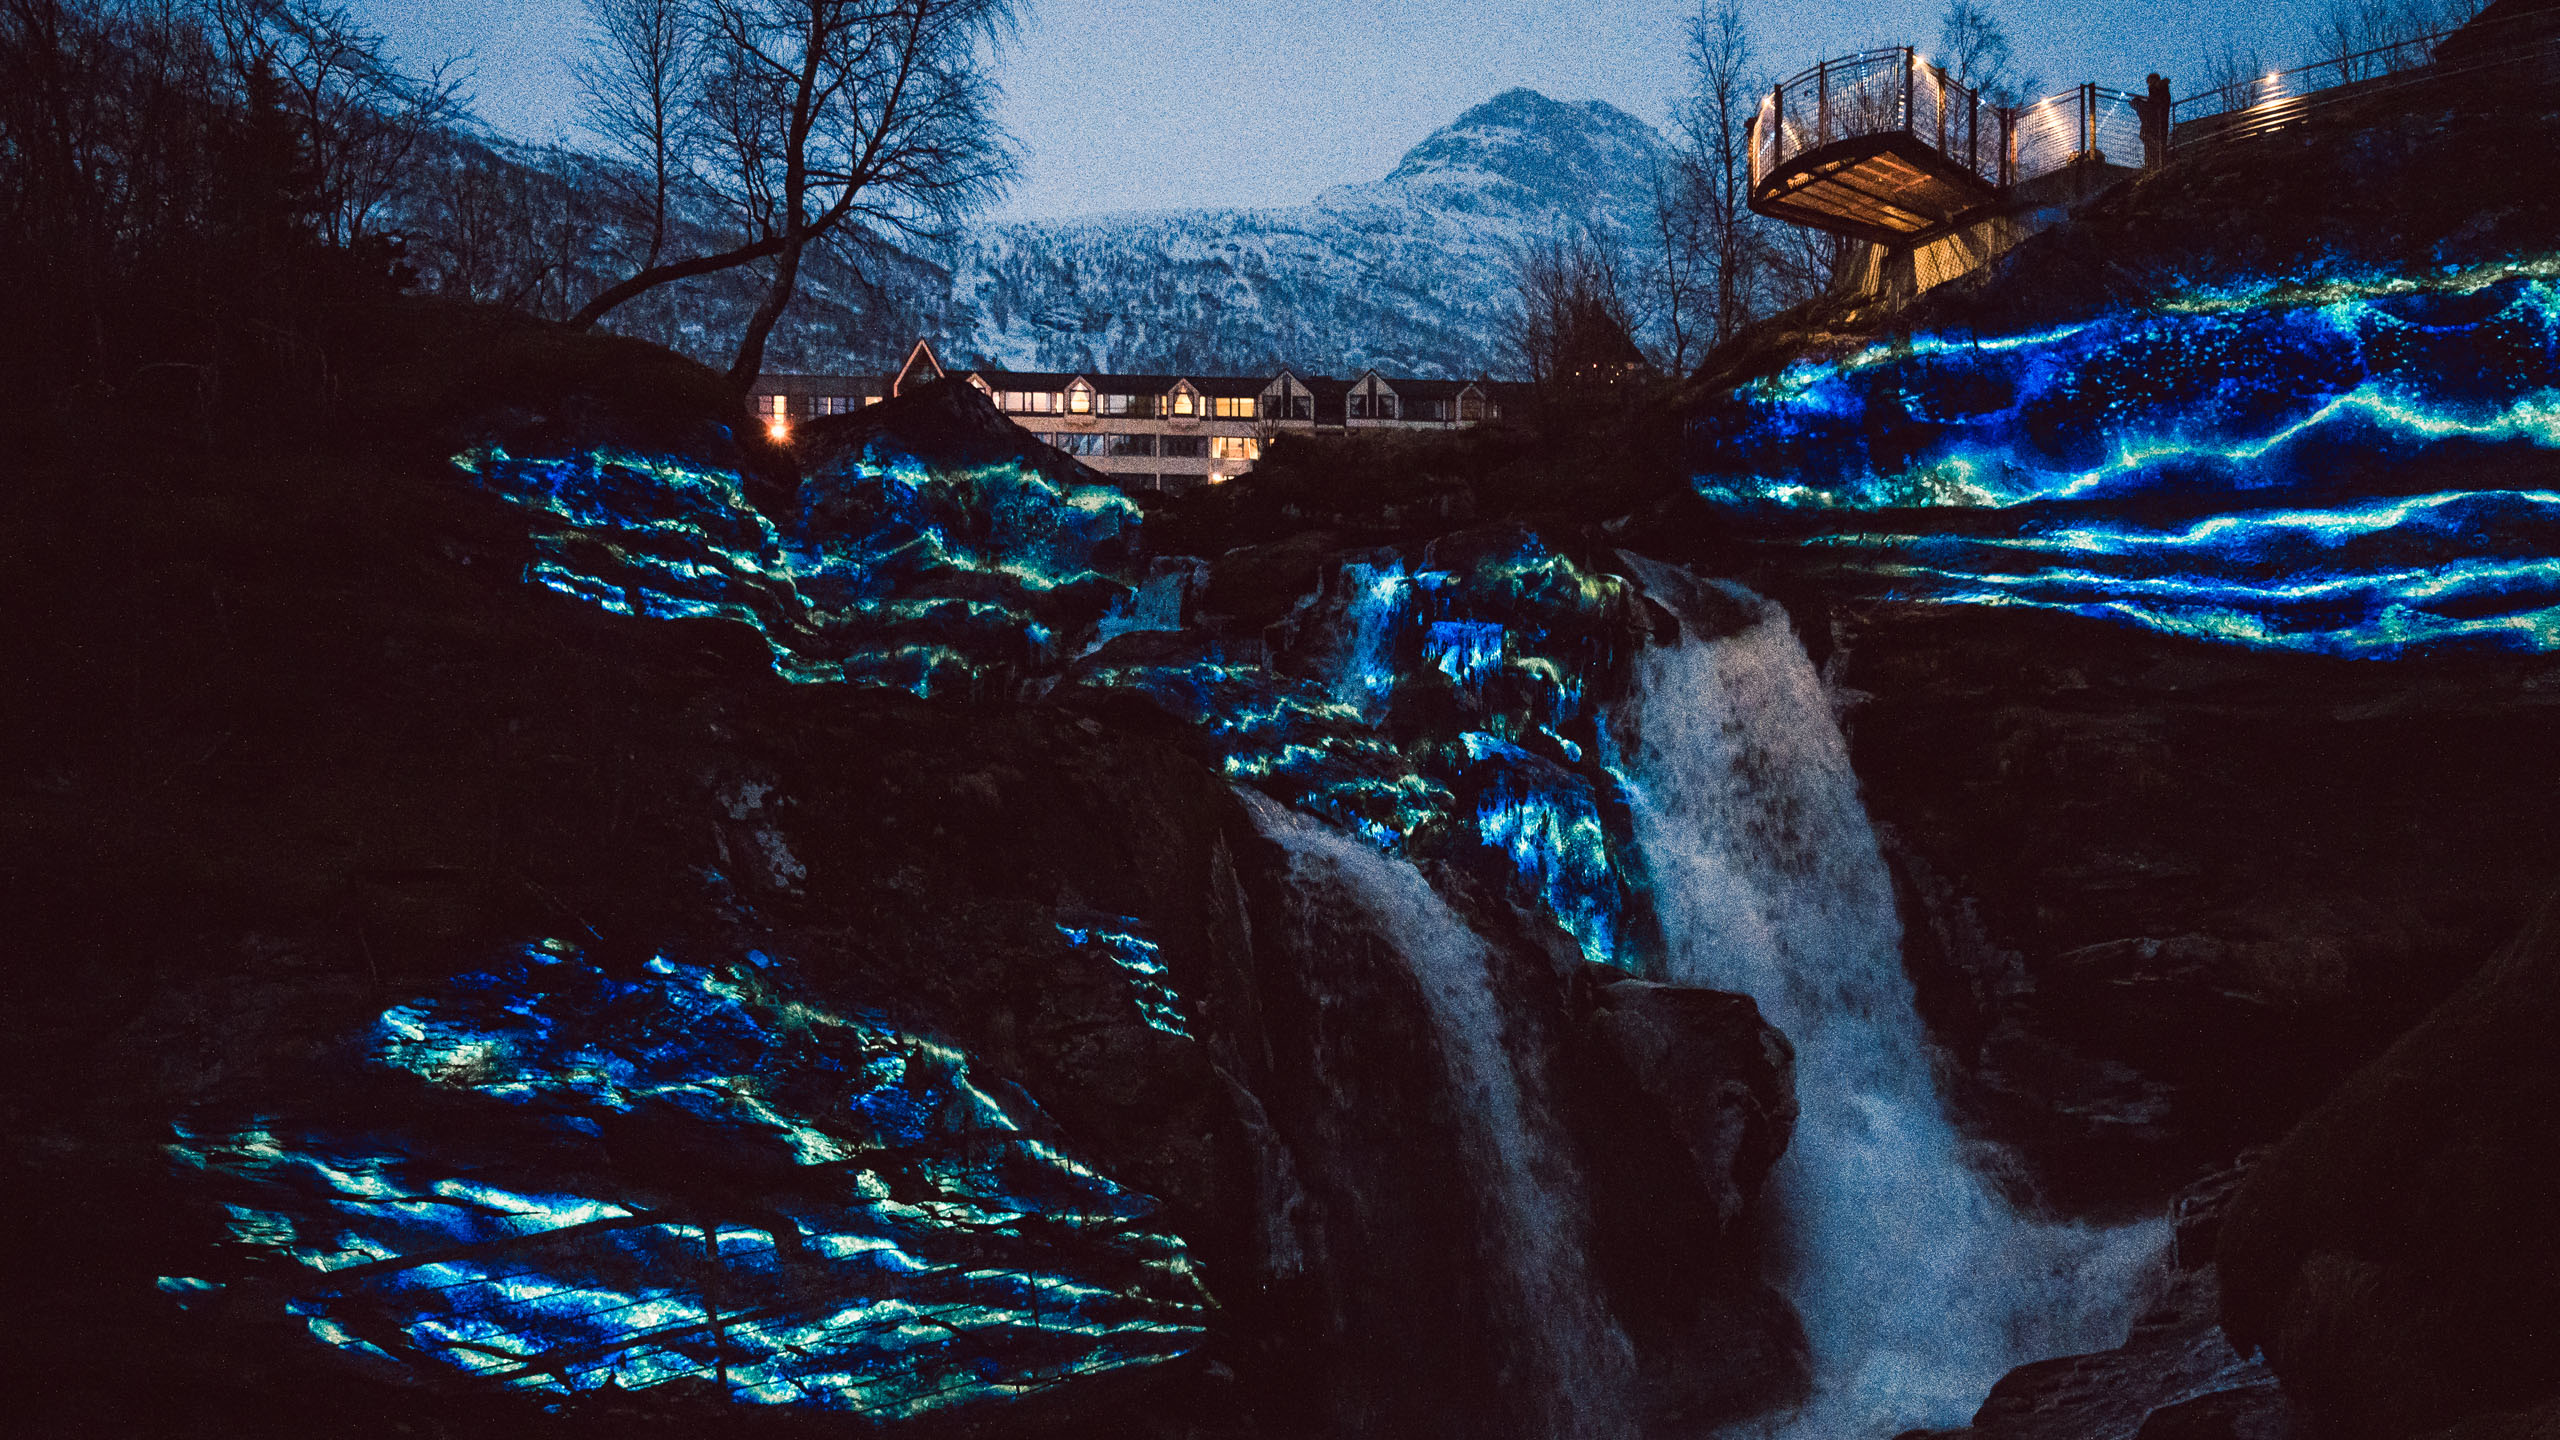 Rocks and waterfall with a blue projection mapping at geiranger fjord light festival